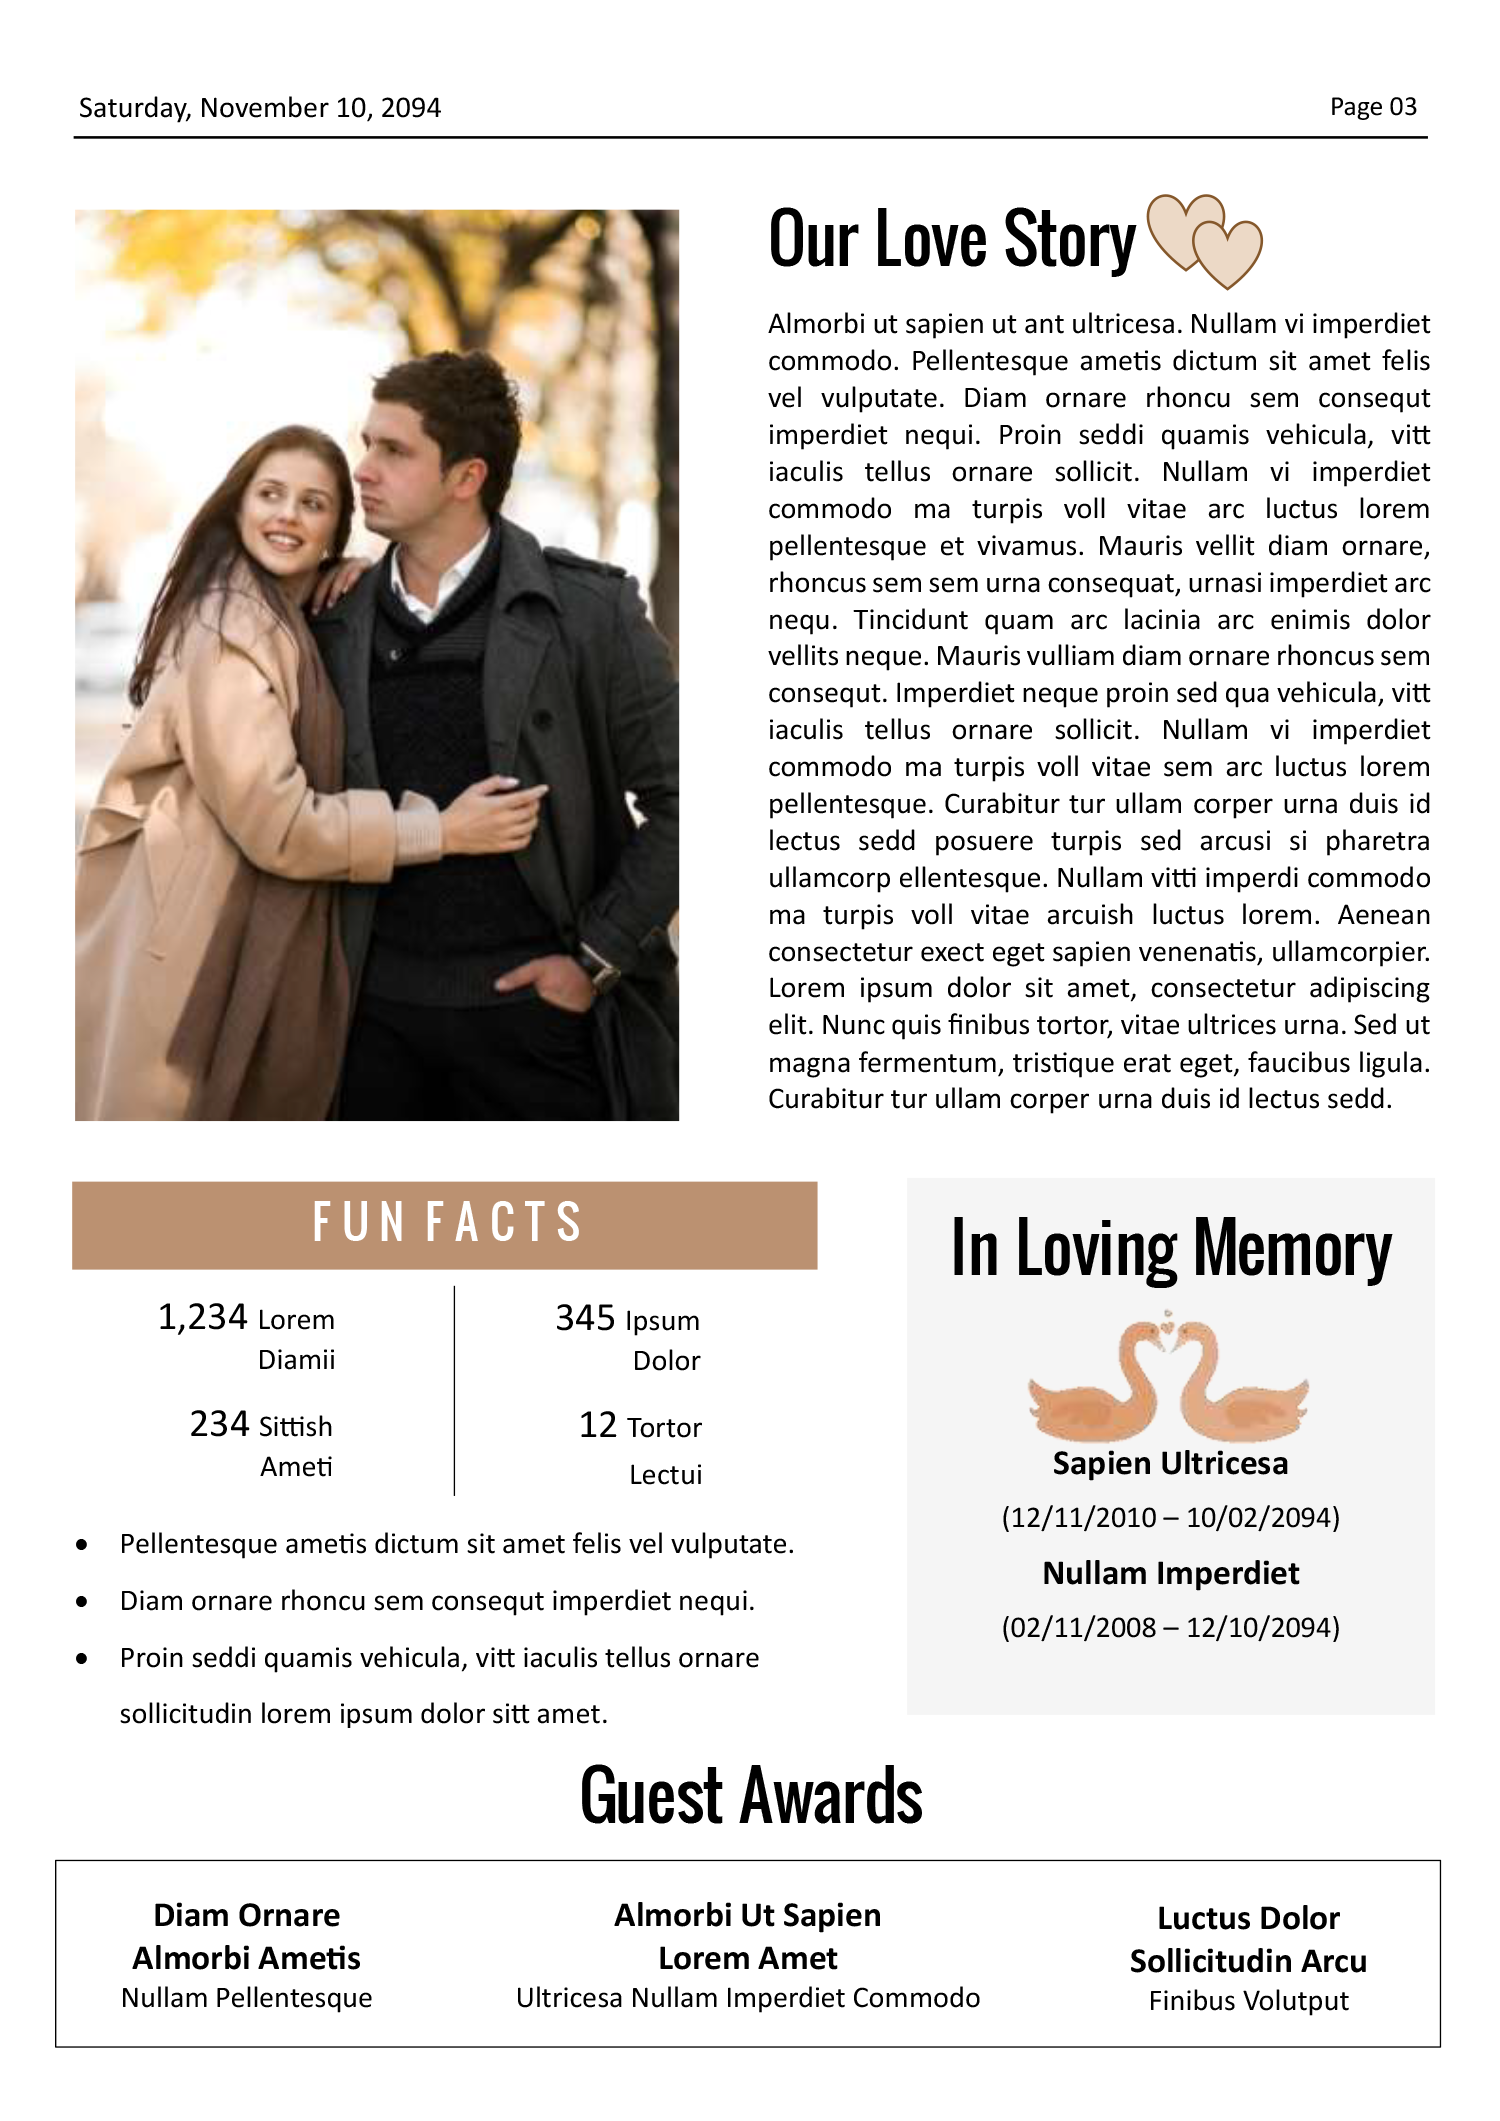 White Paper Wedding Newspaper Template - Page 03